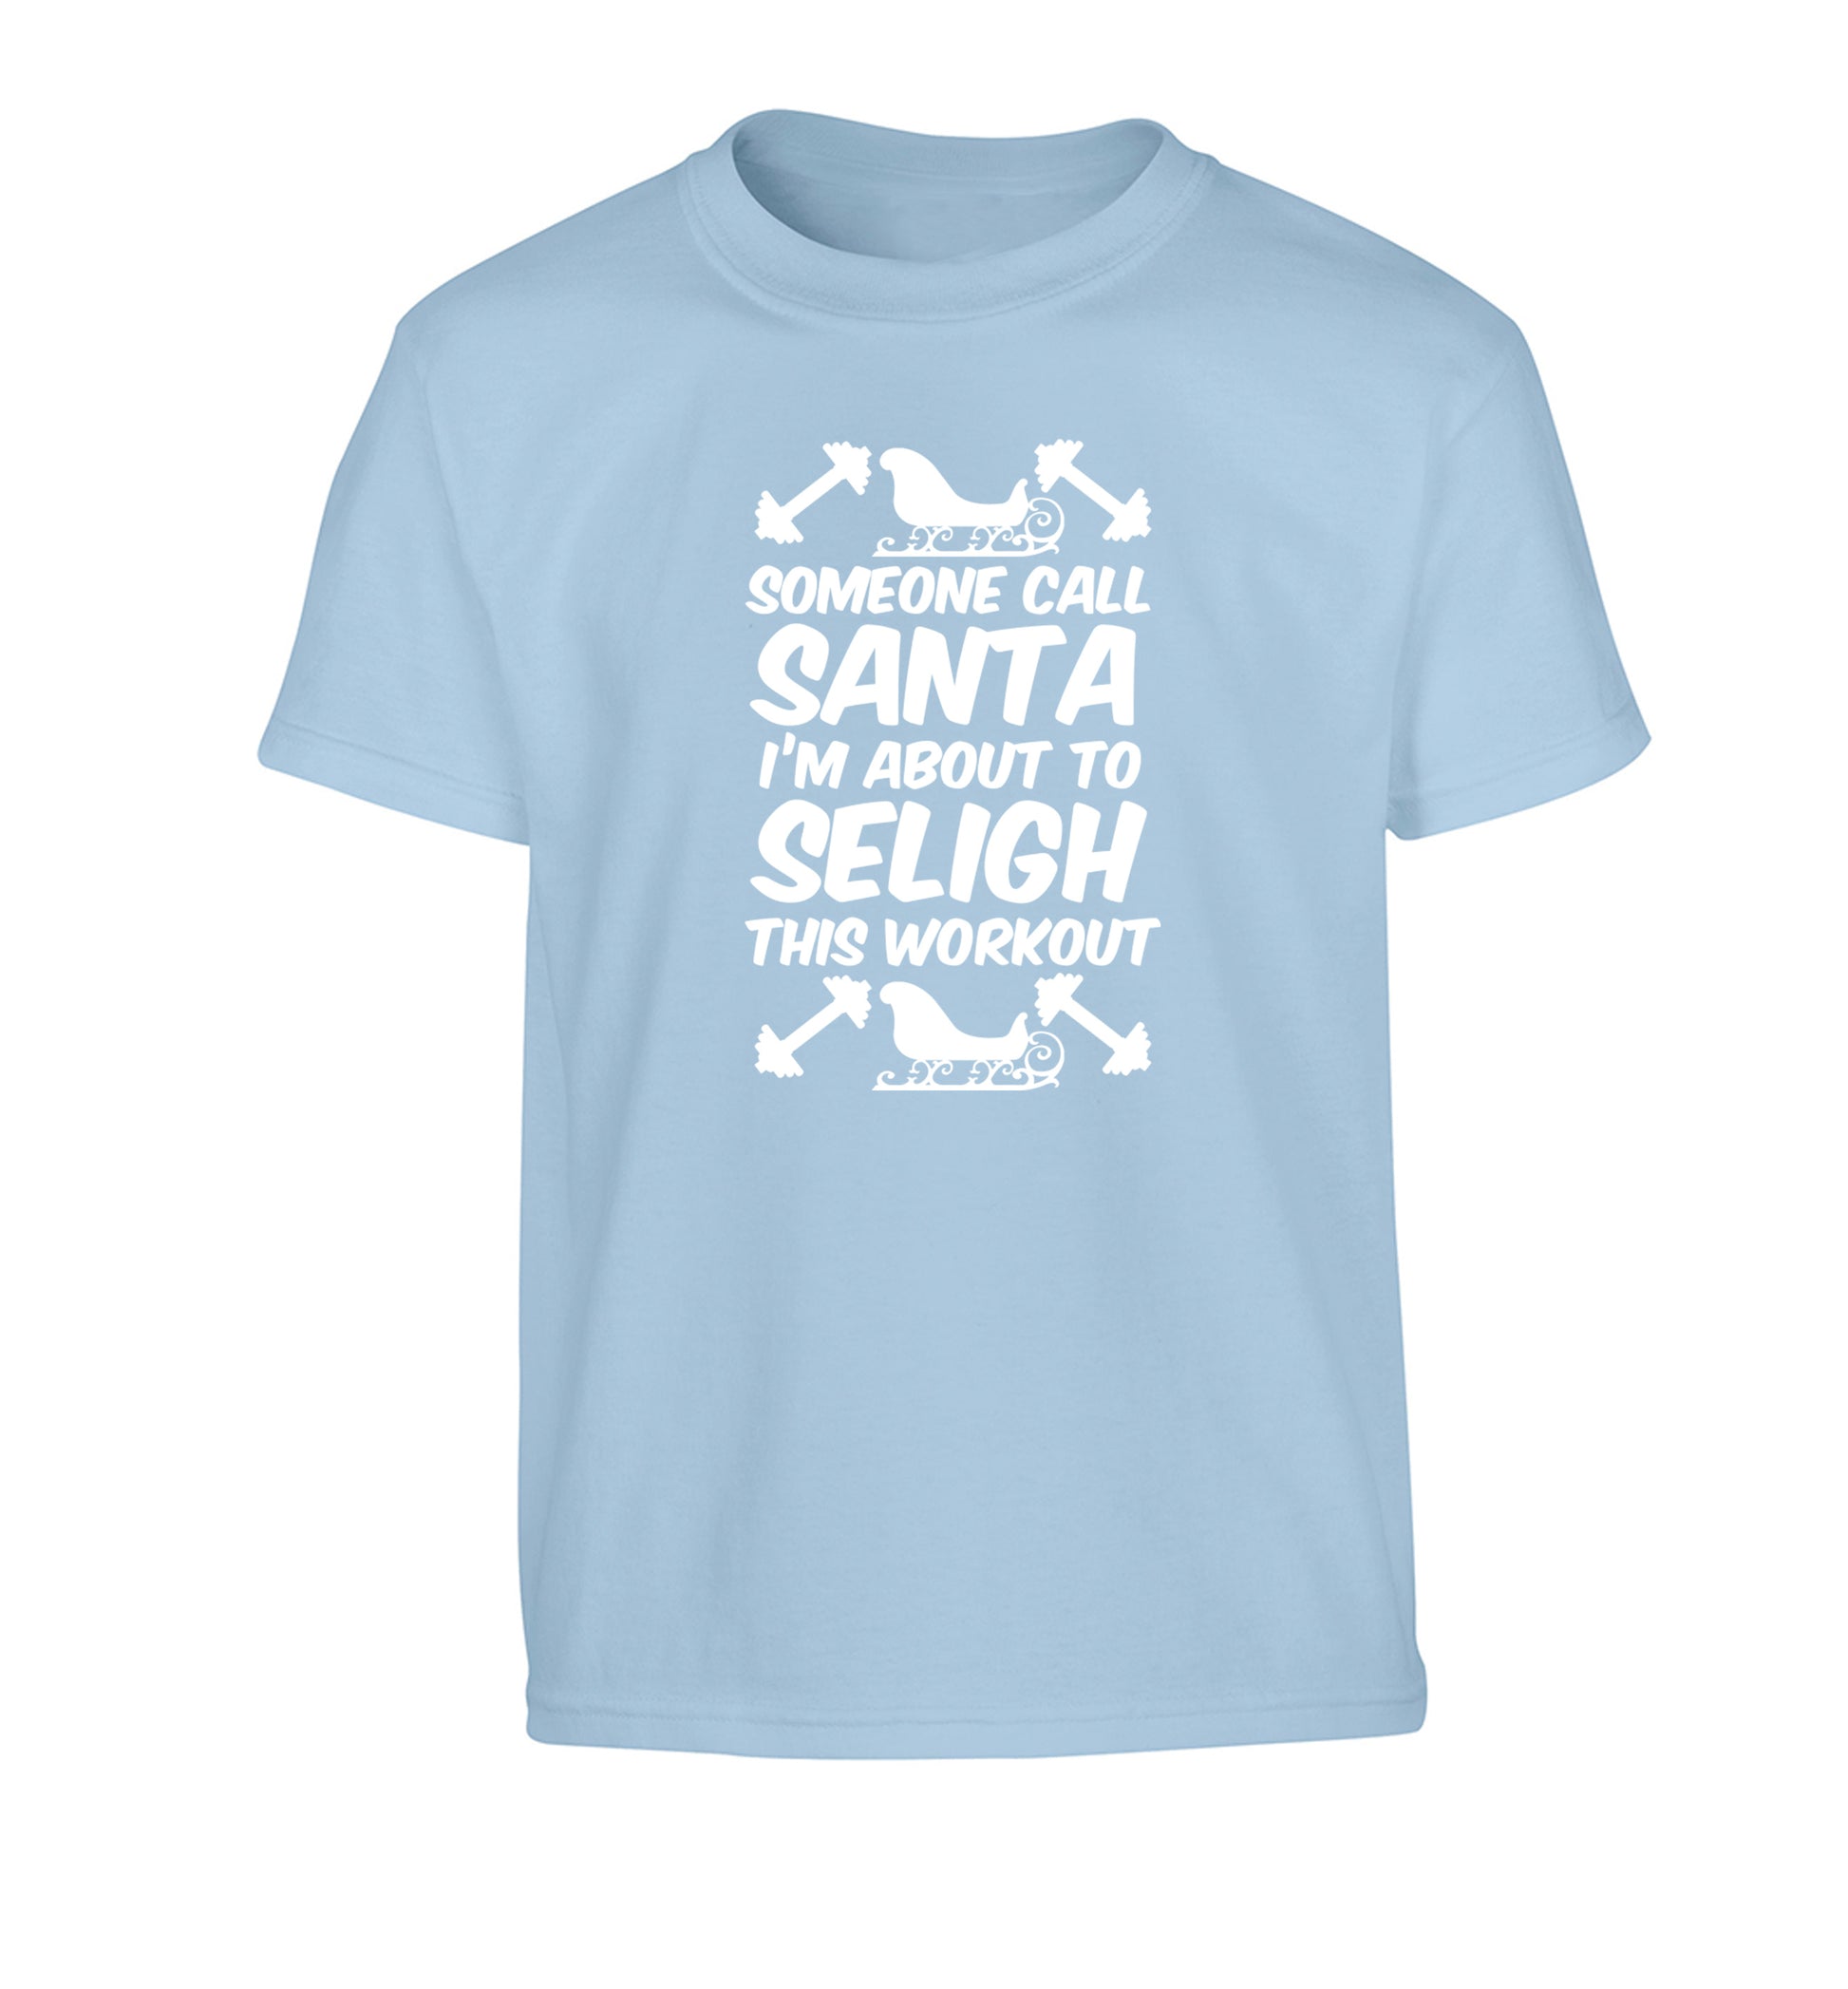 Someone call santa, I'm about to sleigh this workout Children's light blue Tshirt 12-14 Years